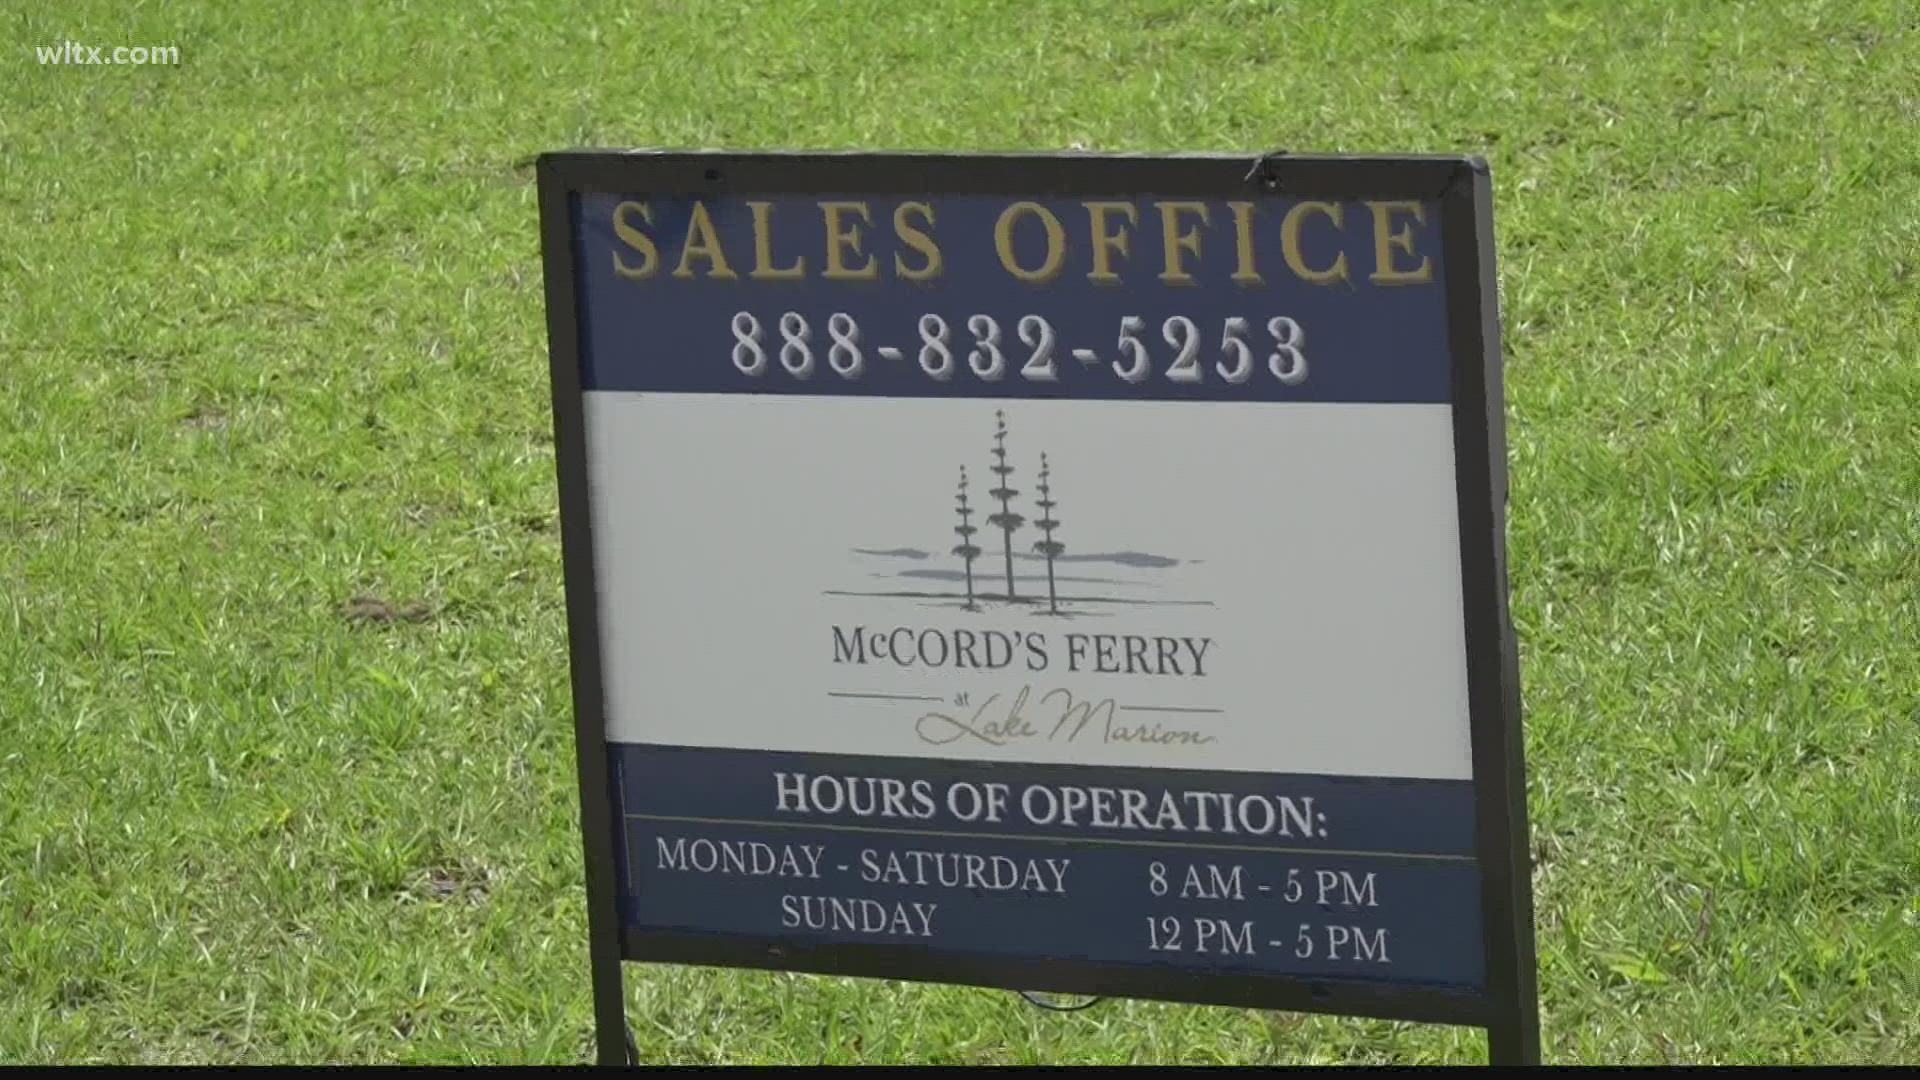 One thousand homes are coming to the Town of Elloree. The new development is called McCord's Ferry and is located at Lake Marion near Santee.